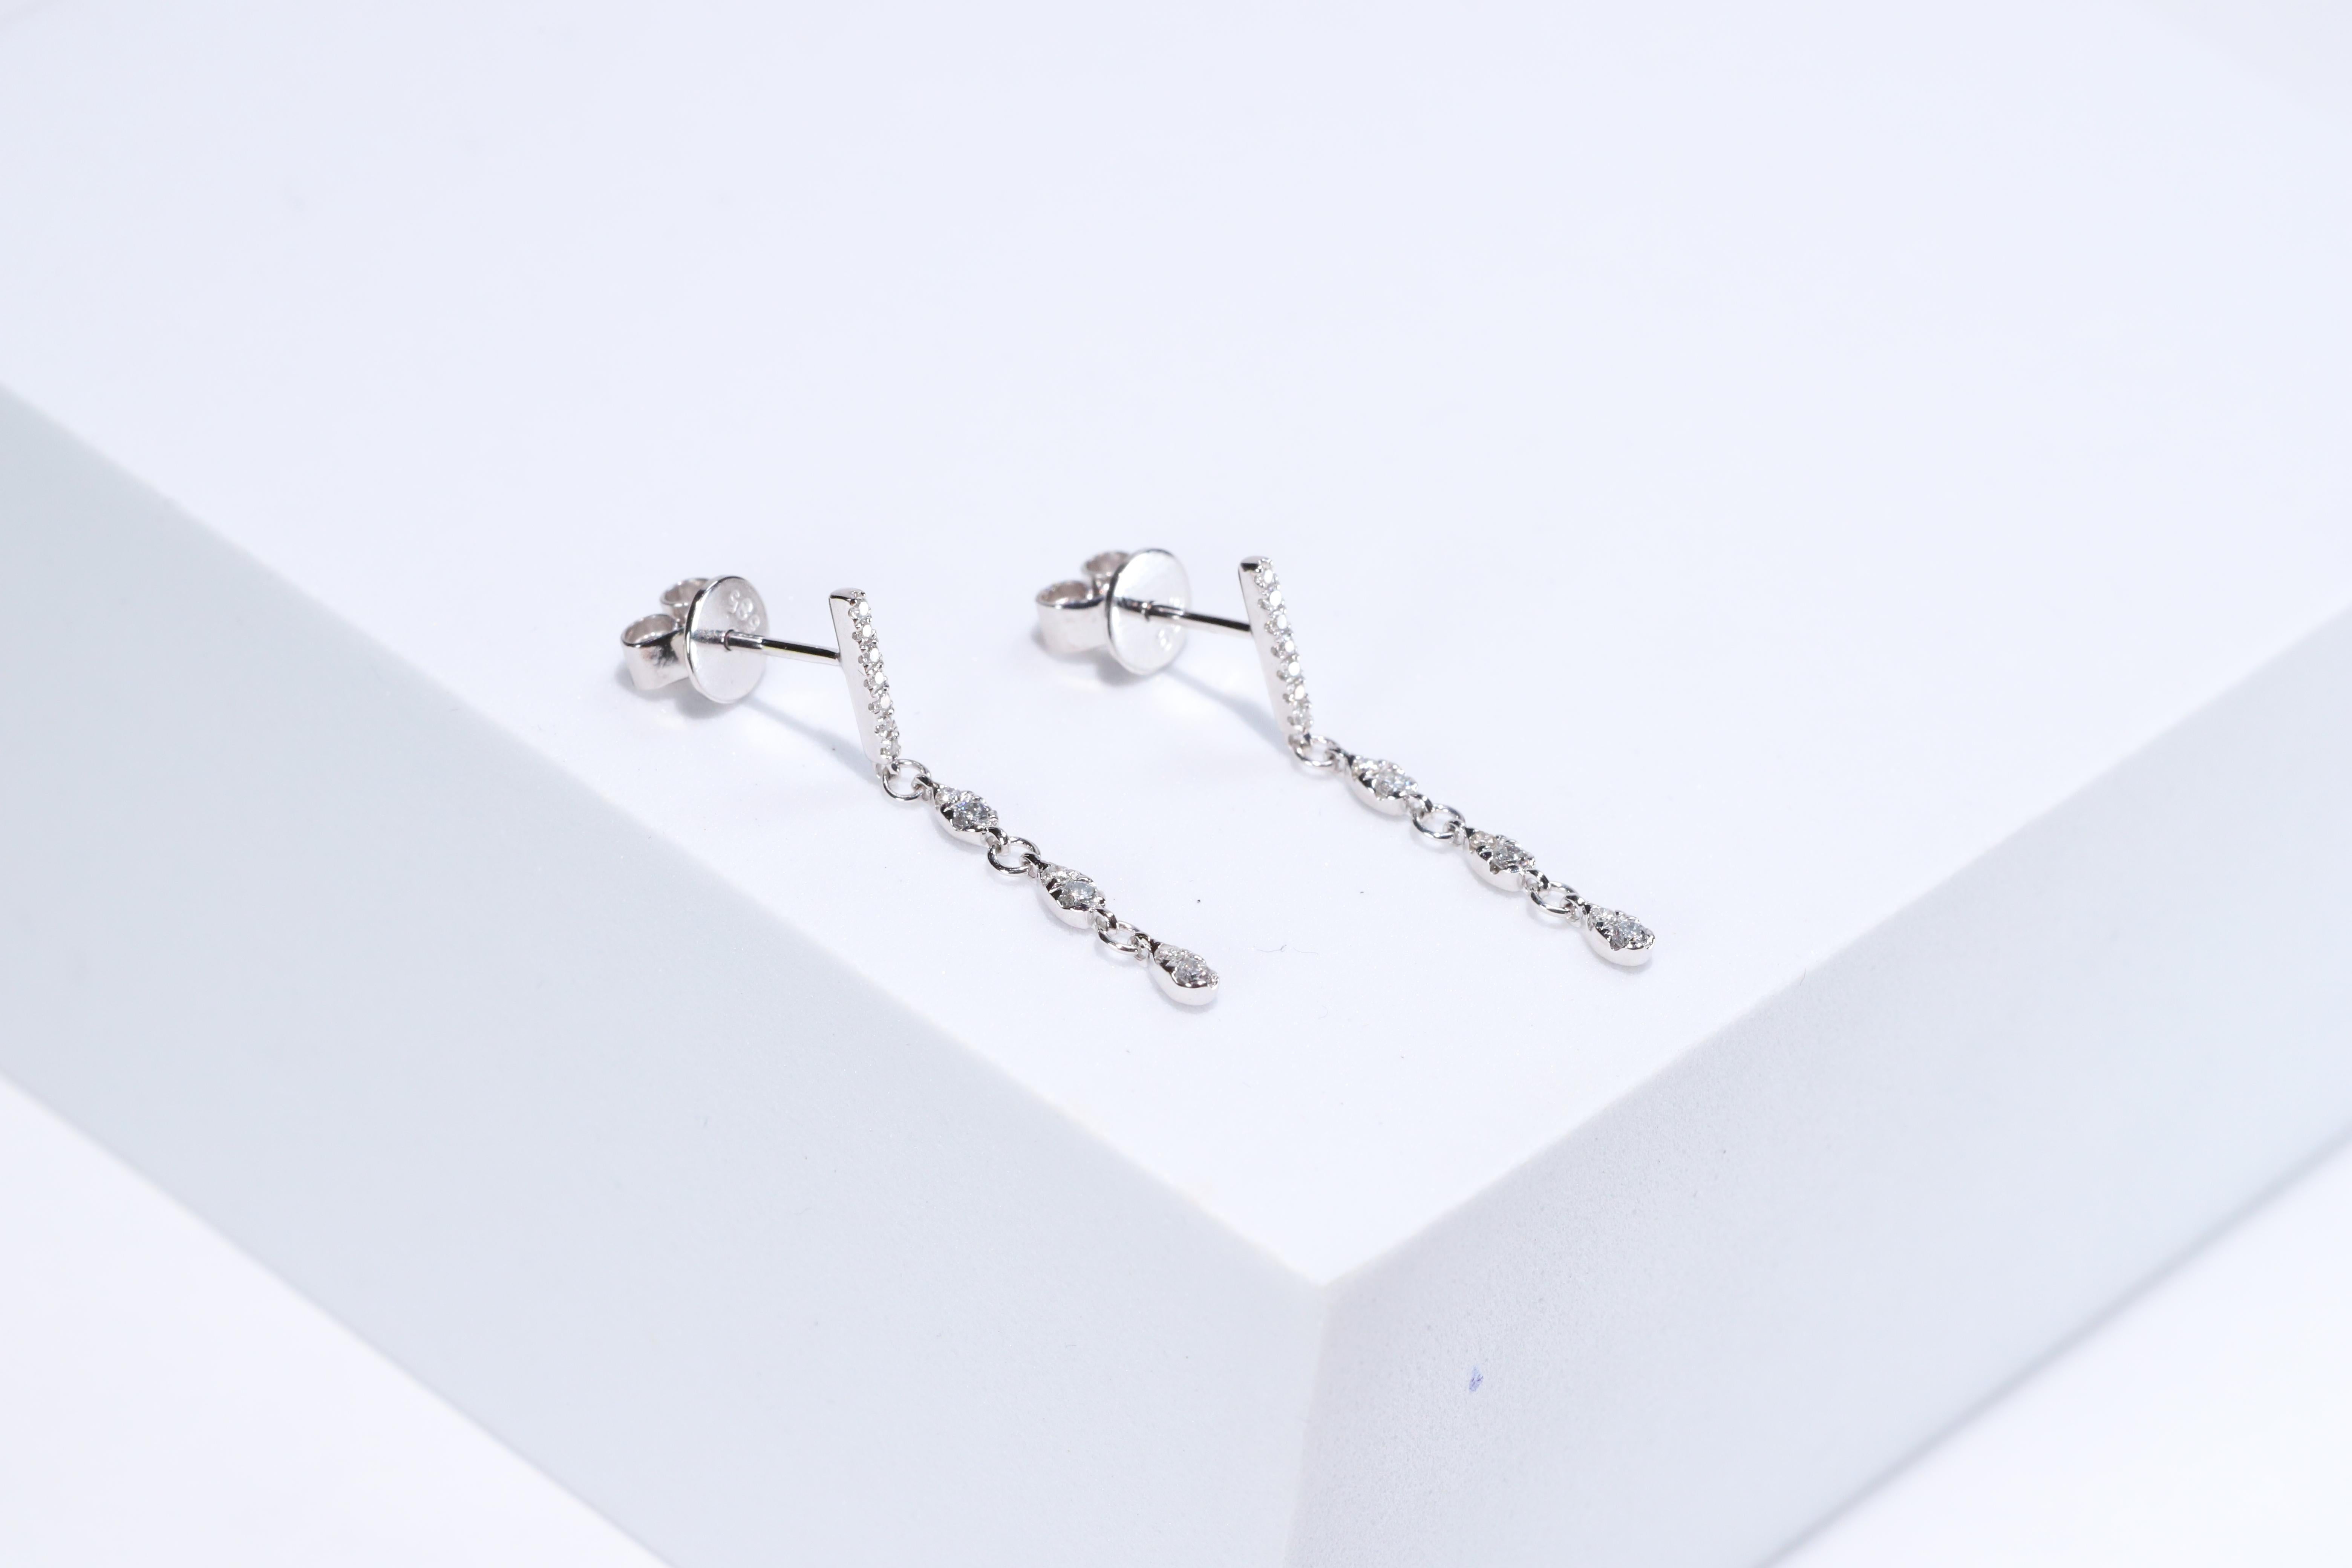 Each of these pretty earrings from Gin & Grace features a with white diamonds. These earrings are made of rich 14-karat White gold with a high polish. Style: Dangle, Diamonds: 26 pcs Diamond cut: Round Diamond weight: 0.20 carat Color: G-H Clarity: